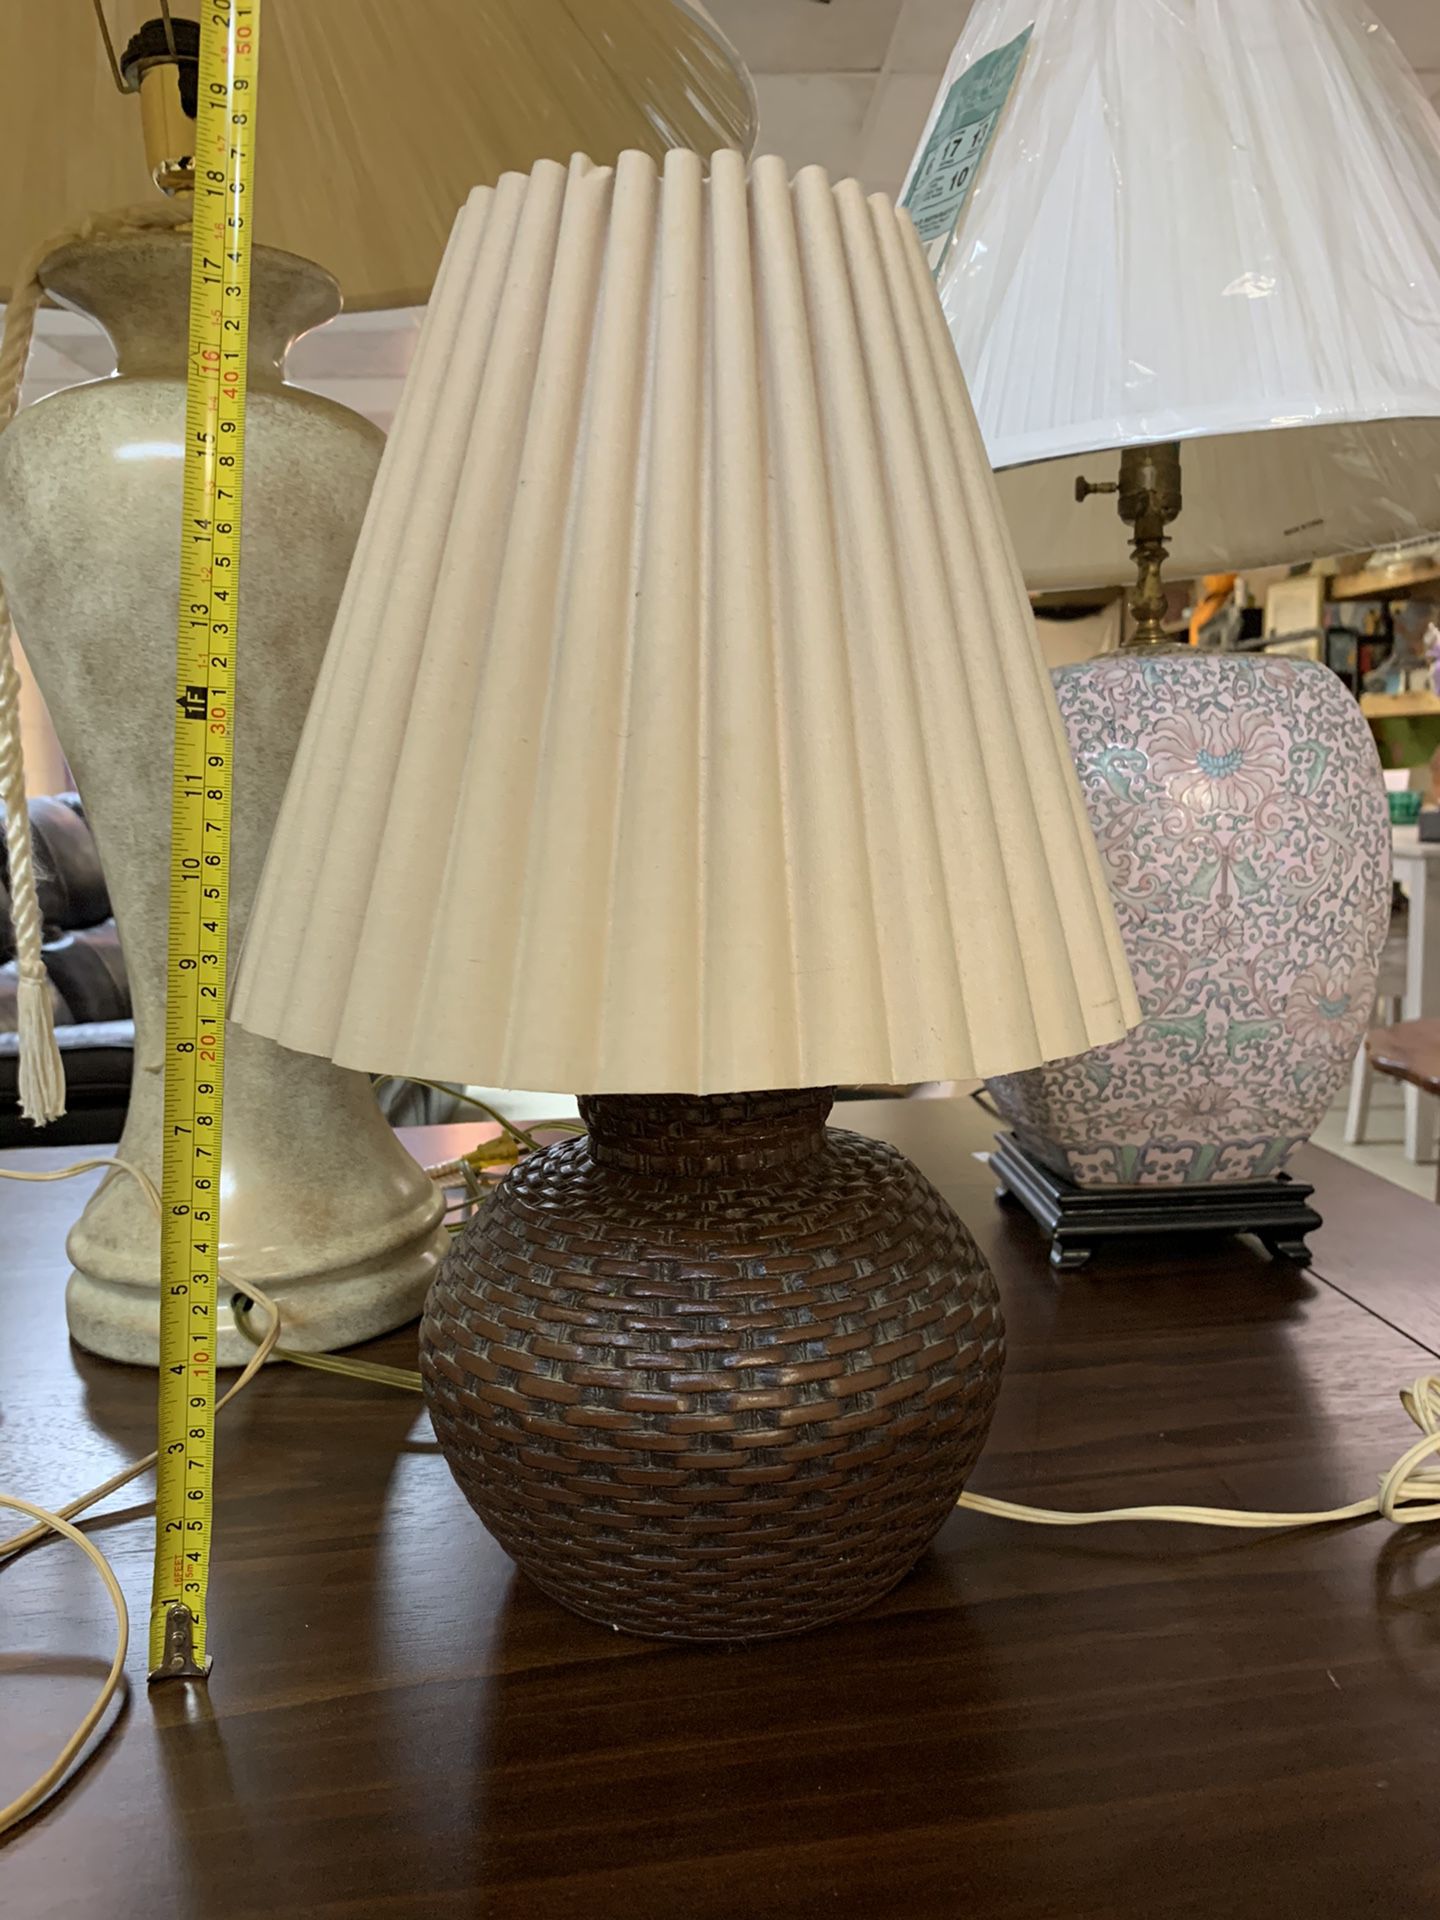 Used Single Lamp With Shade Approximately 18 inched Height